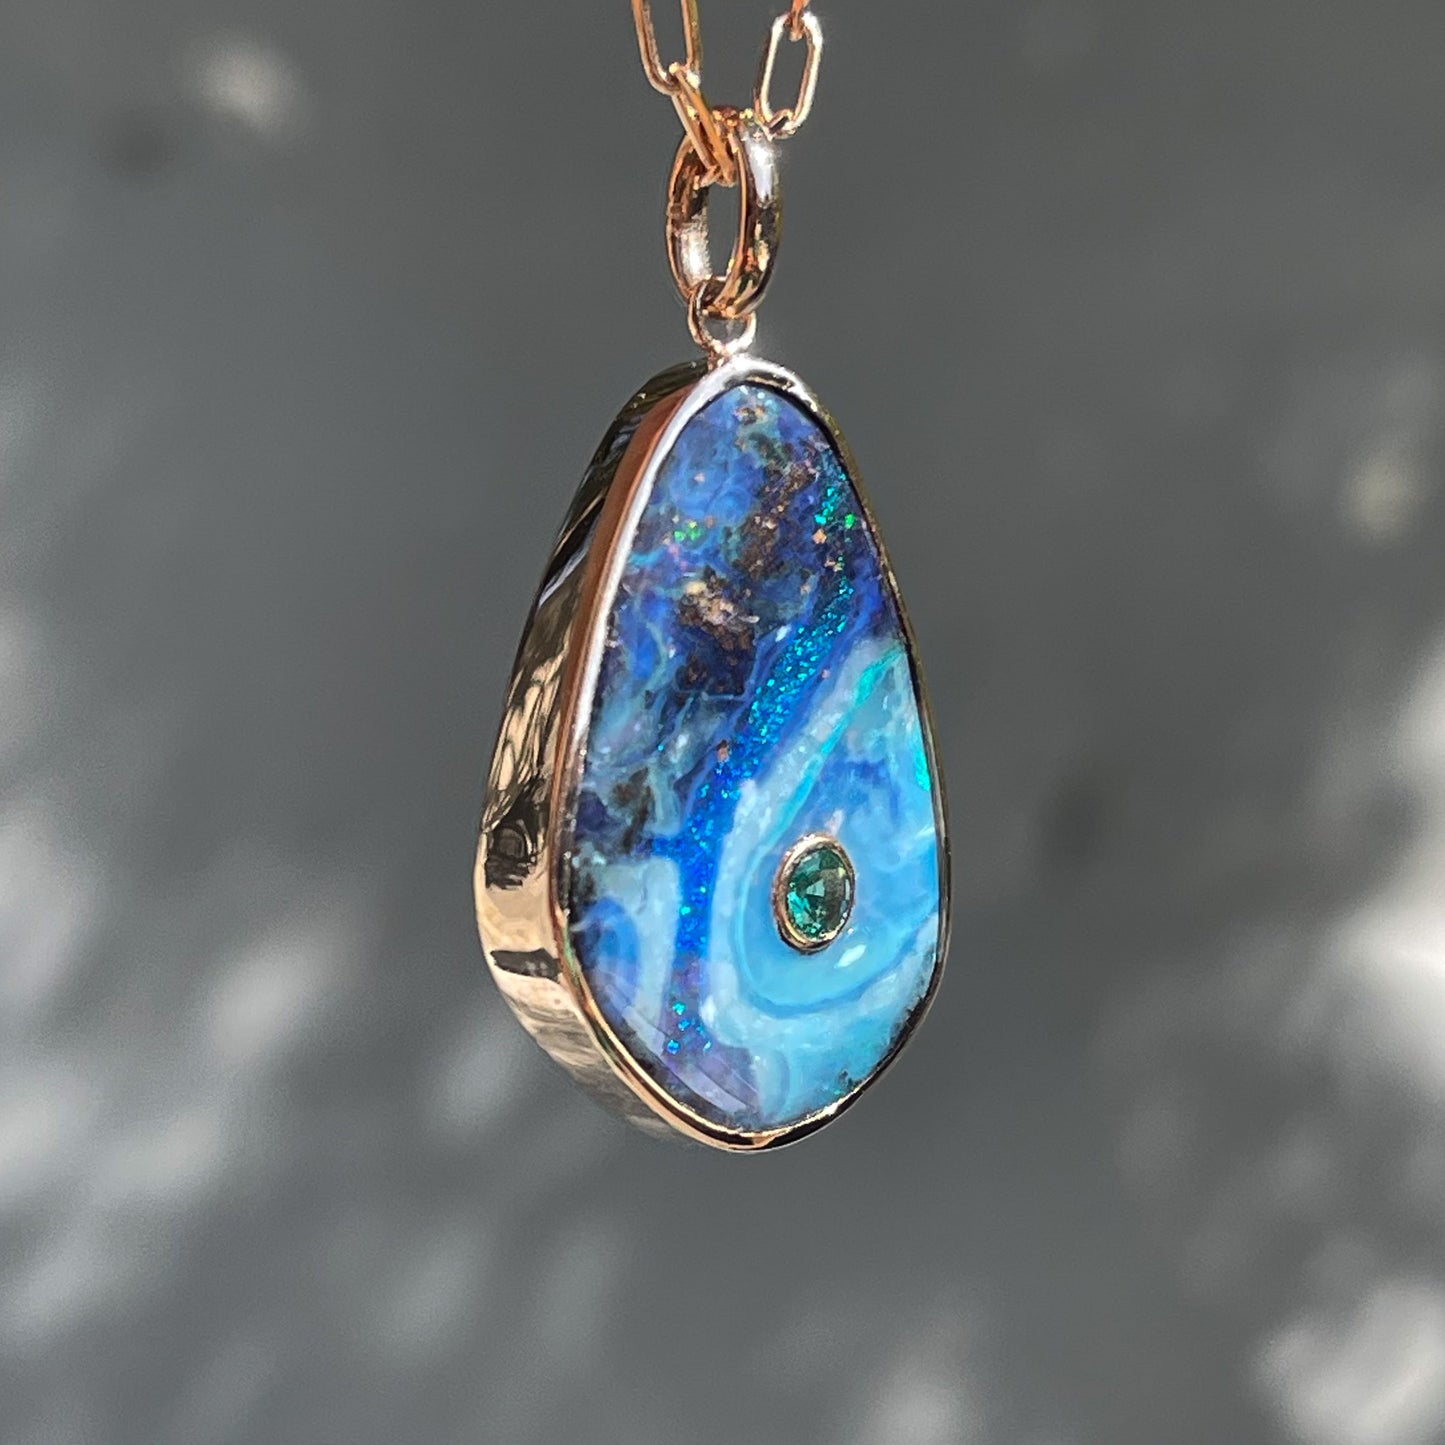 An Australian Opal Necklace by NIXIN Jewelry hanging in profile showing its bezel setting. The Boulder Opal has an emerald inlay.